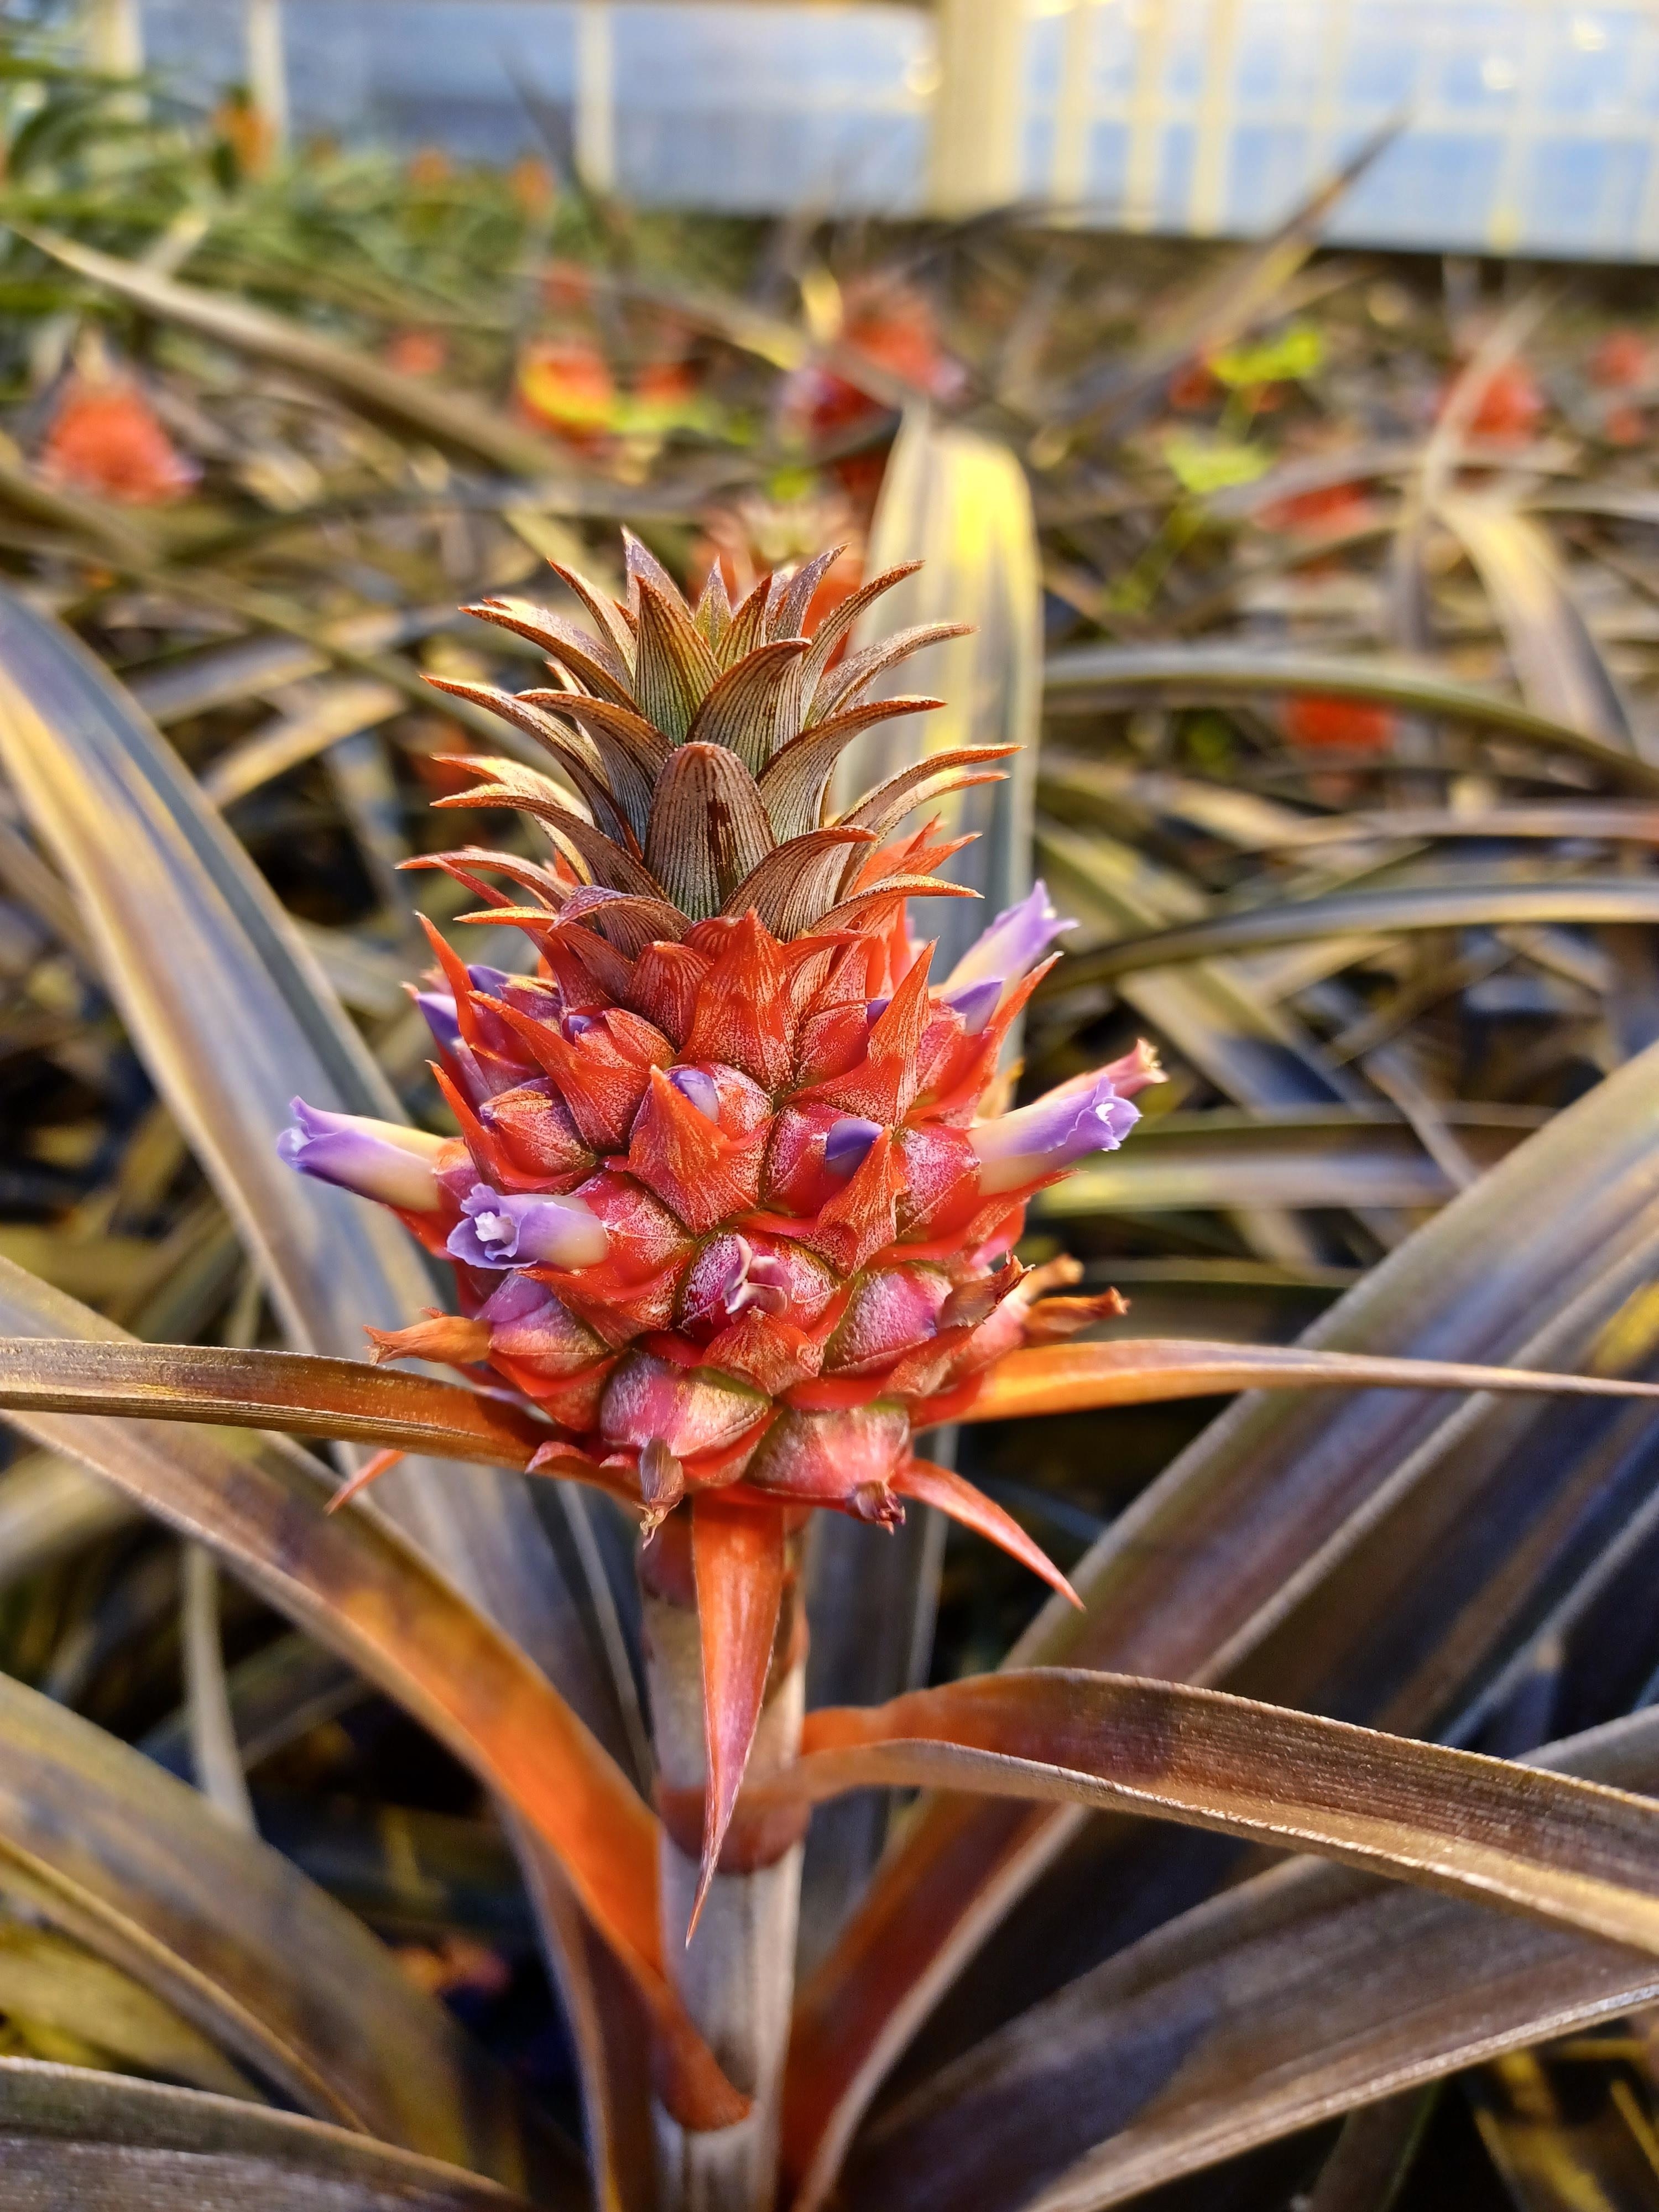 Young pineapple growing among pointy leaves, with purple flowers emerging from its top